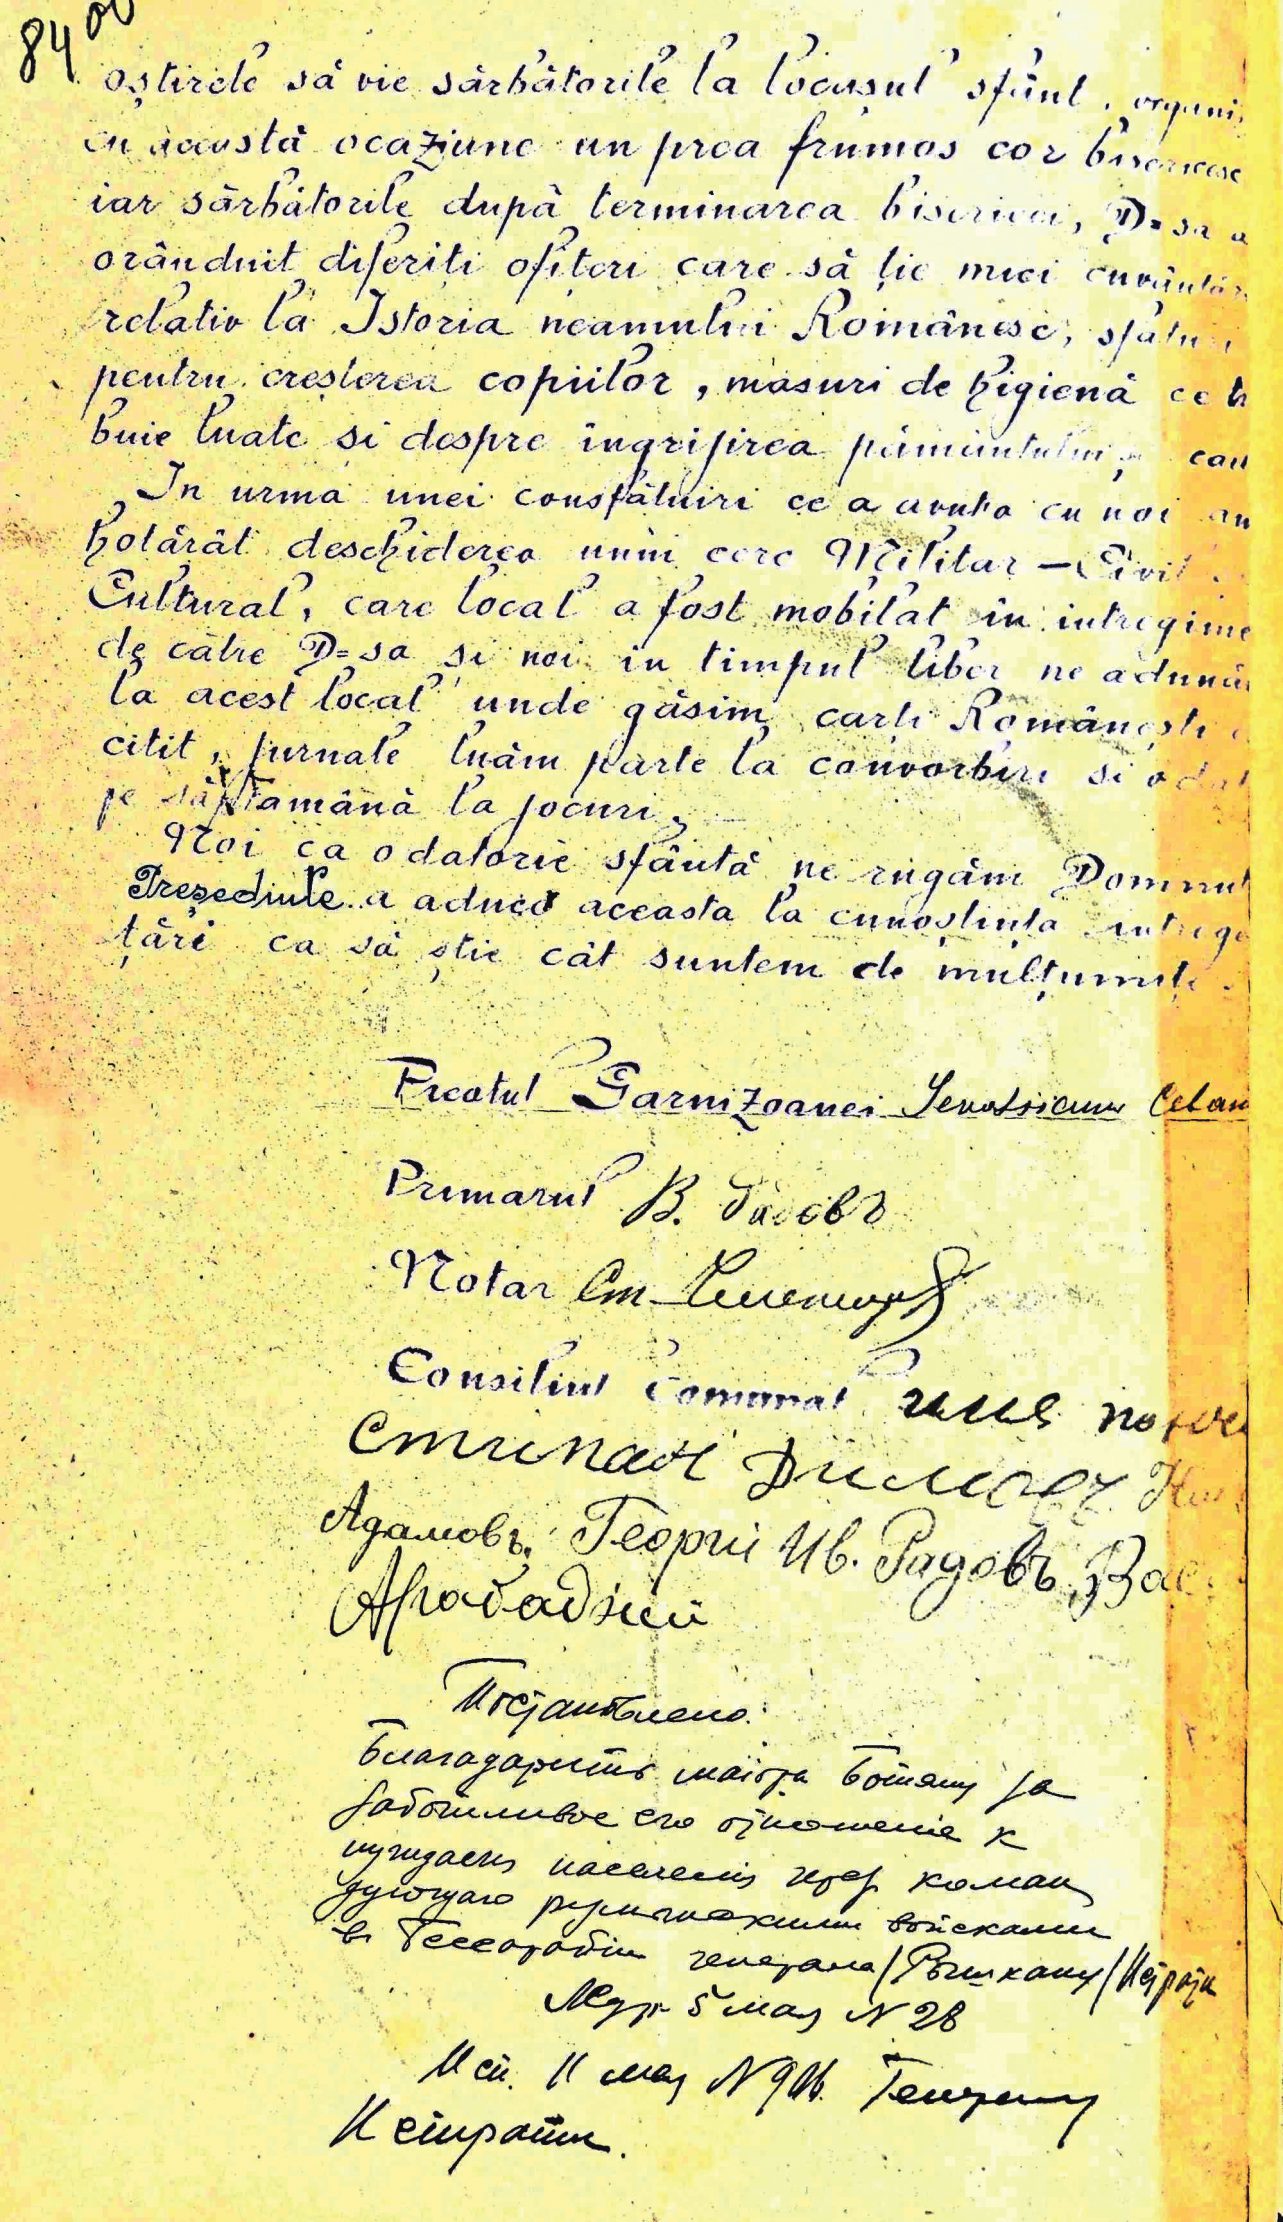 A collective letter of thanks for everything that has happened in the town of Belgrad, with predominantly Bulgarian population, after the arrival of the "Romanian Armed Forces", especially because they were saved "by the Hurricane Bolshevik." The mayor of V. Radov, members of the Communal Council: Ilia Poncev, Stepan Dimov, Nicolai Adamov, Gheorghi Ivan Radov, Vasili Arabadji. April 27, 1918 (NAMR)